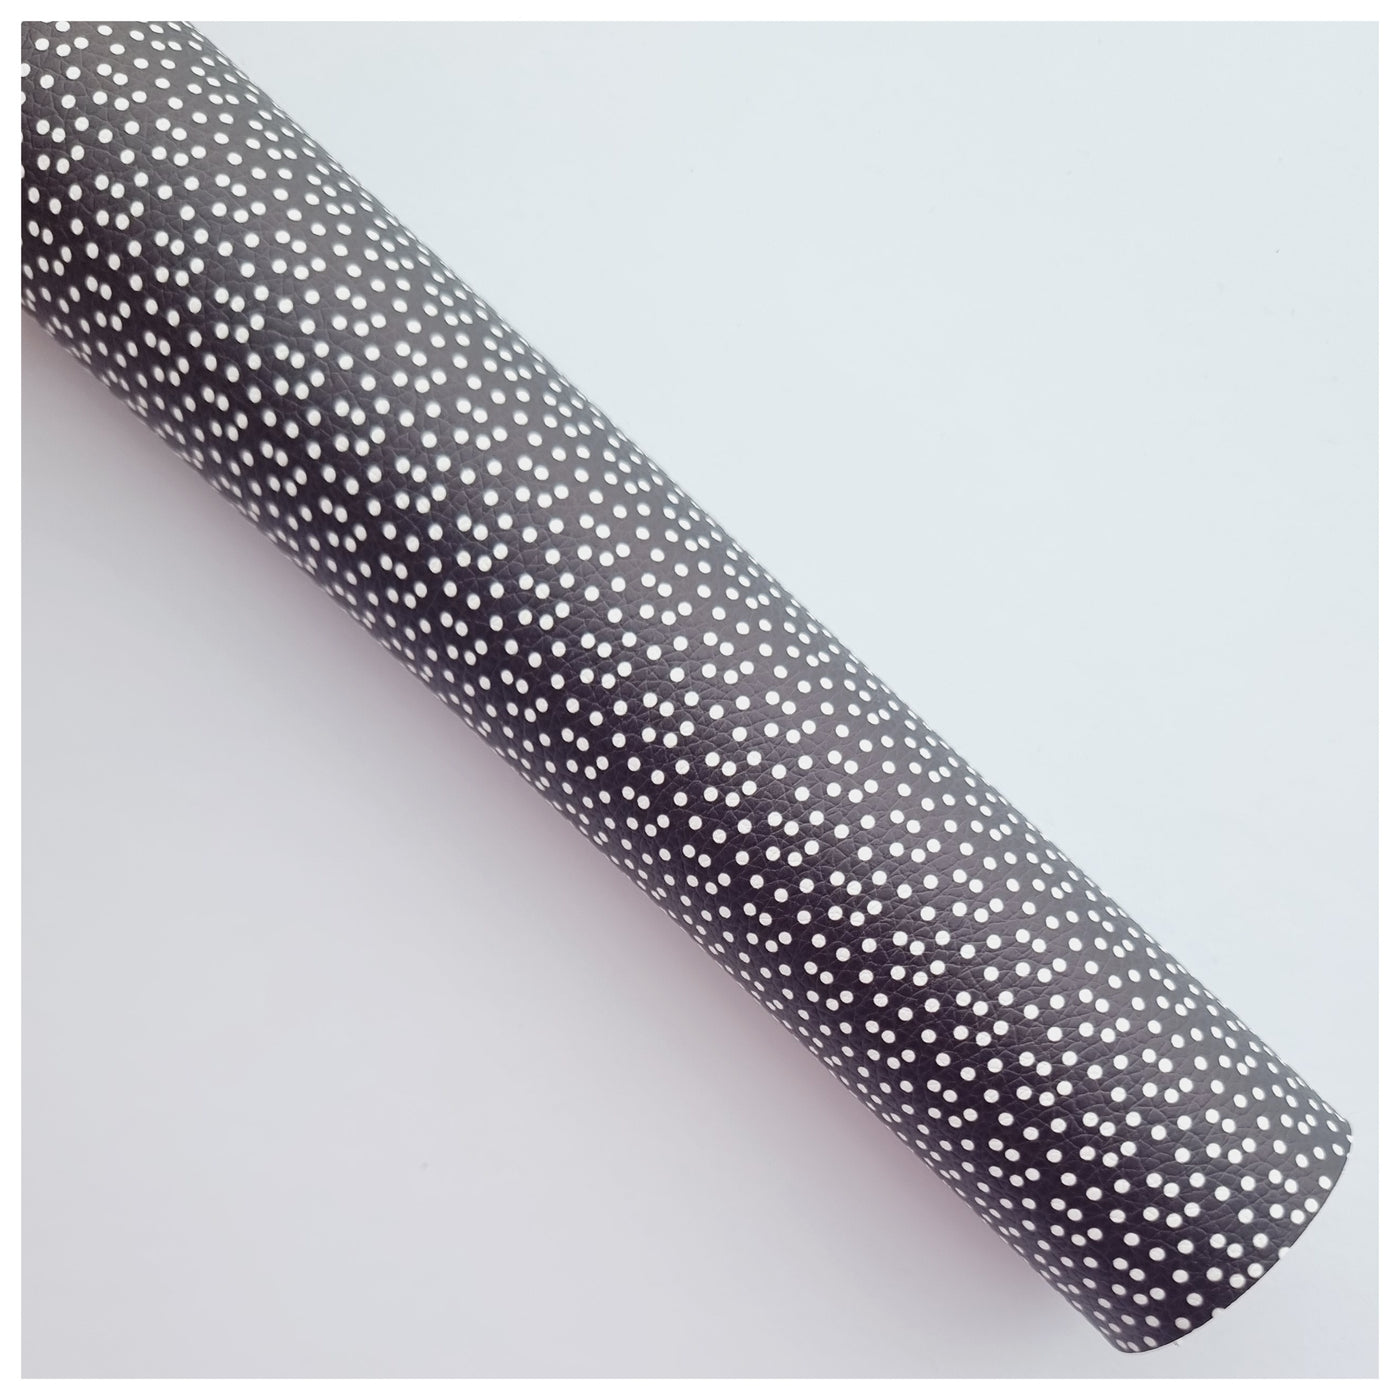 A4 Sheet of White Confetti Dots on Black Litchi Leather